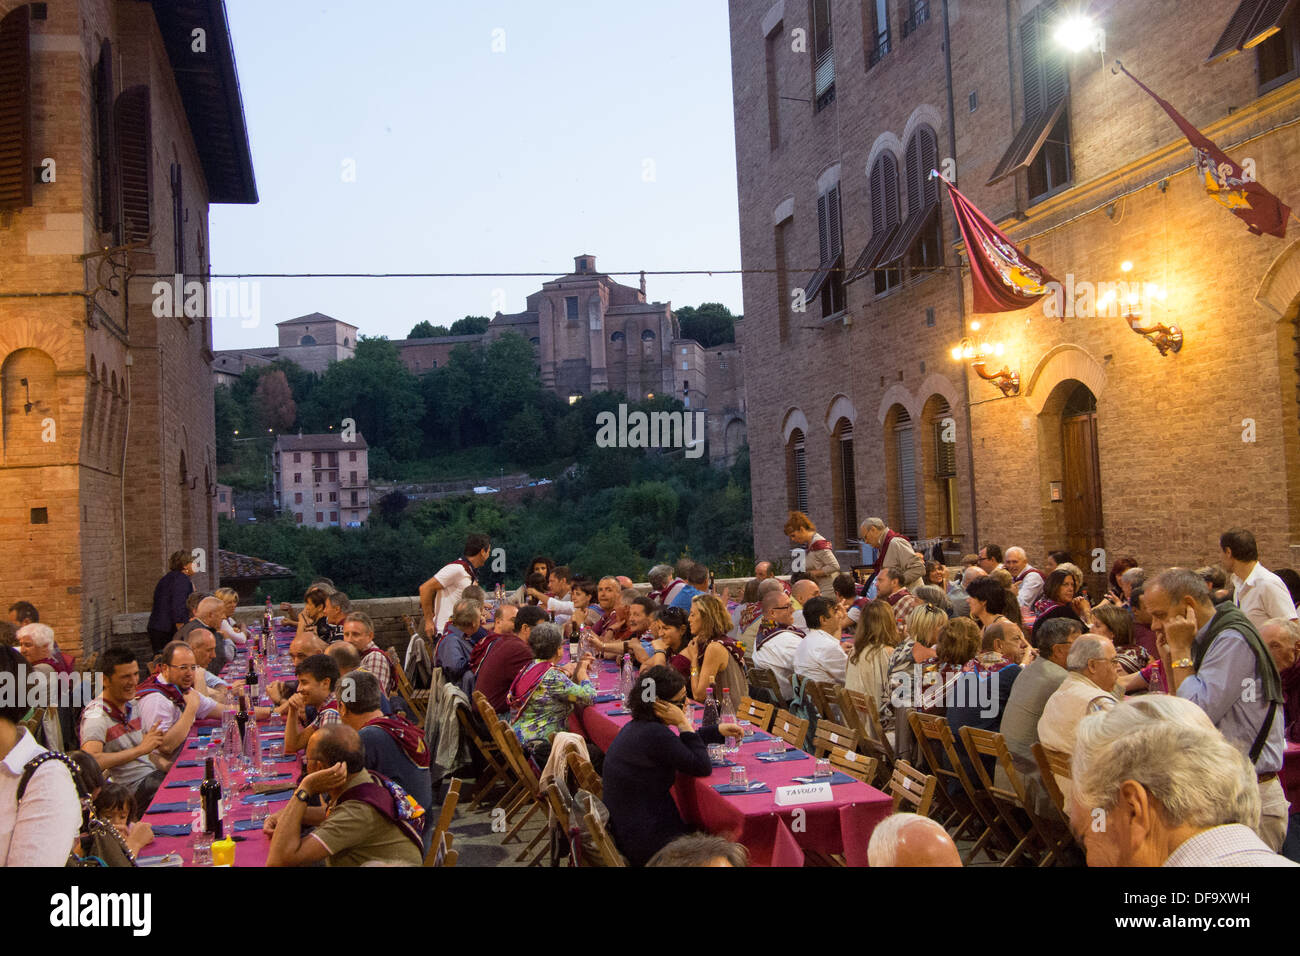 'Torre'  (Tower) contrada (district) meal after the general Palio trial, the evening before the Palio, Siena, Tuscany, Italy Stock Photo